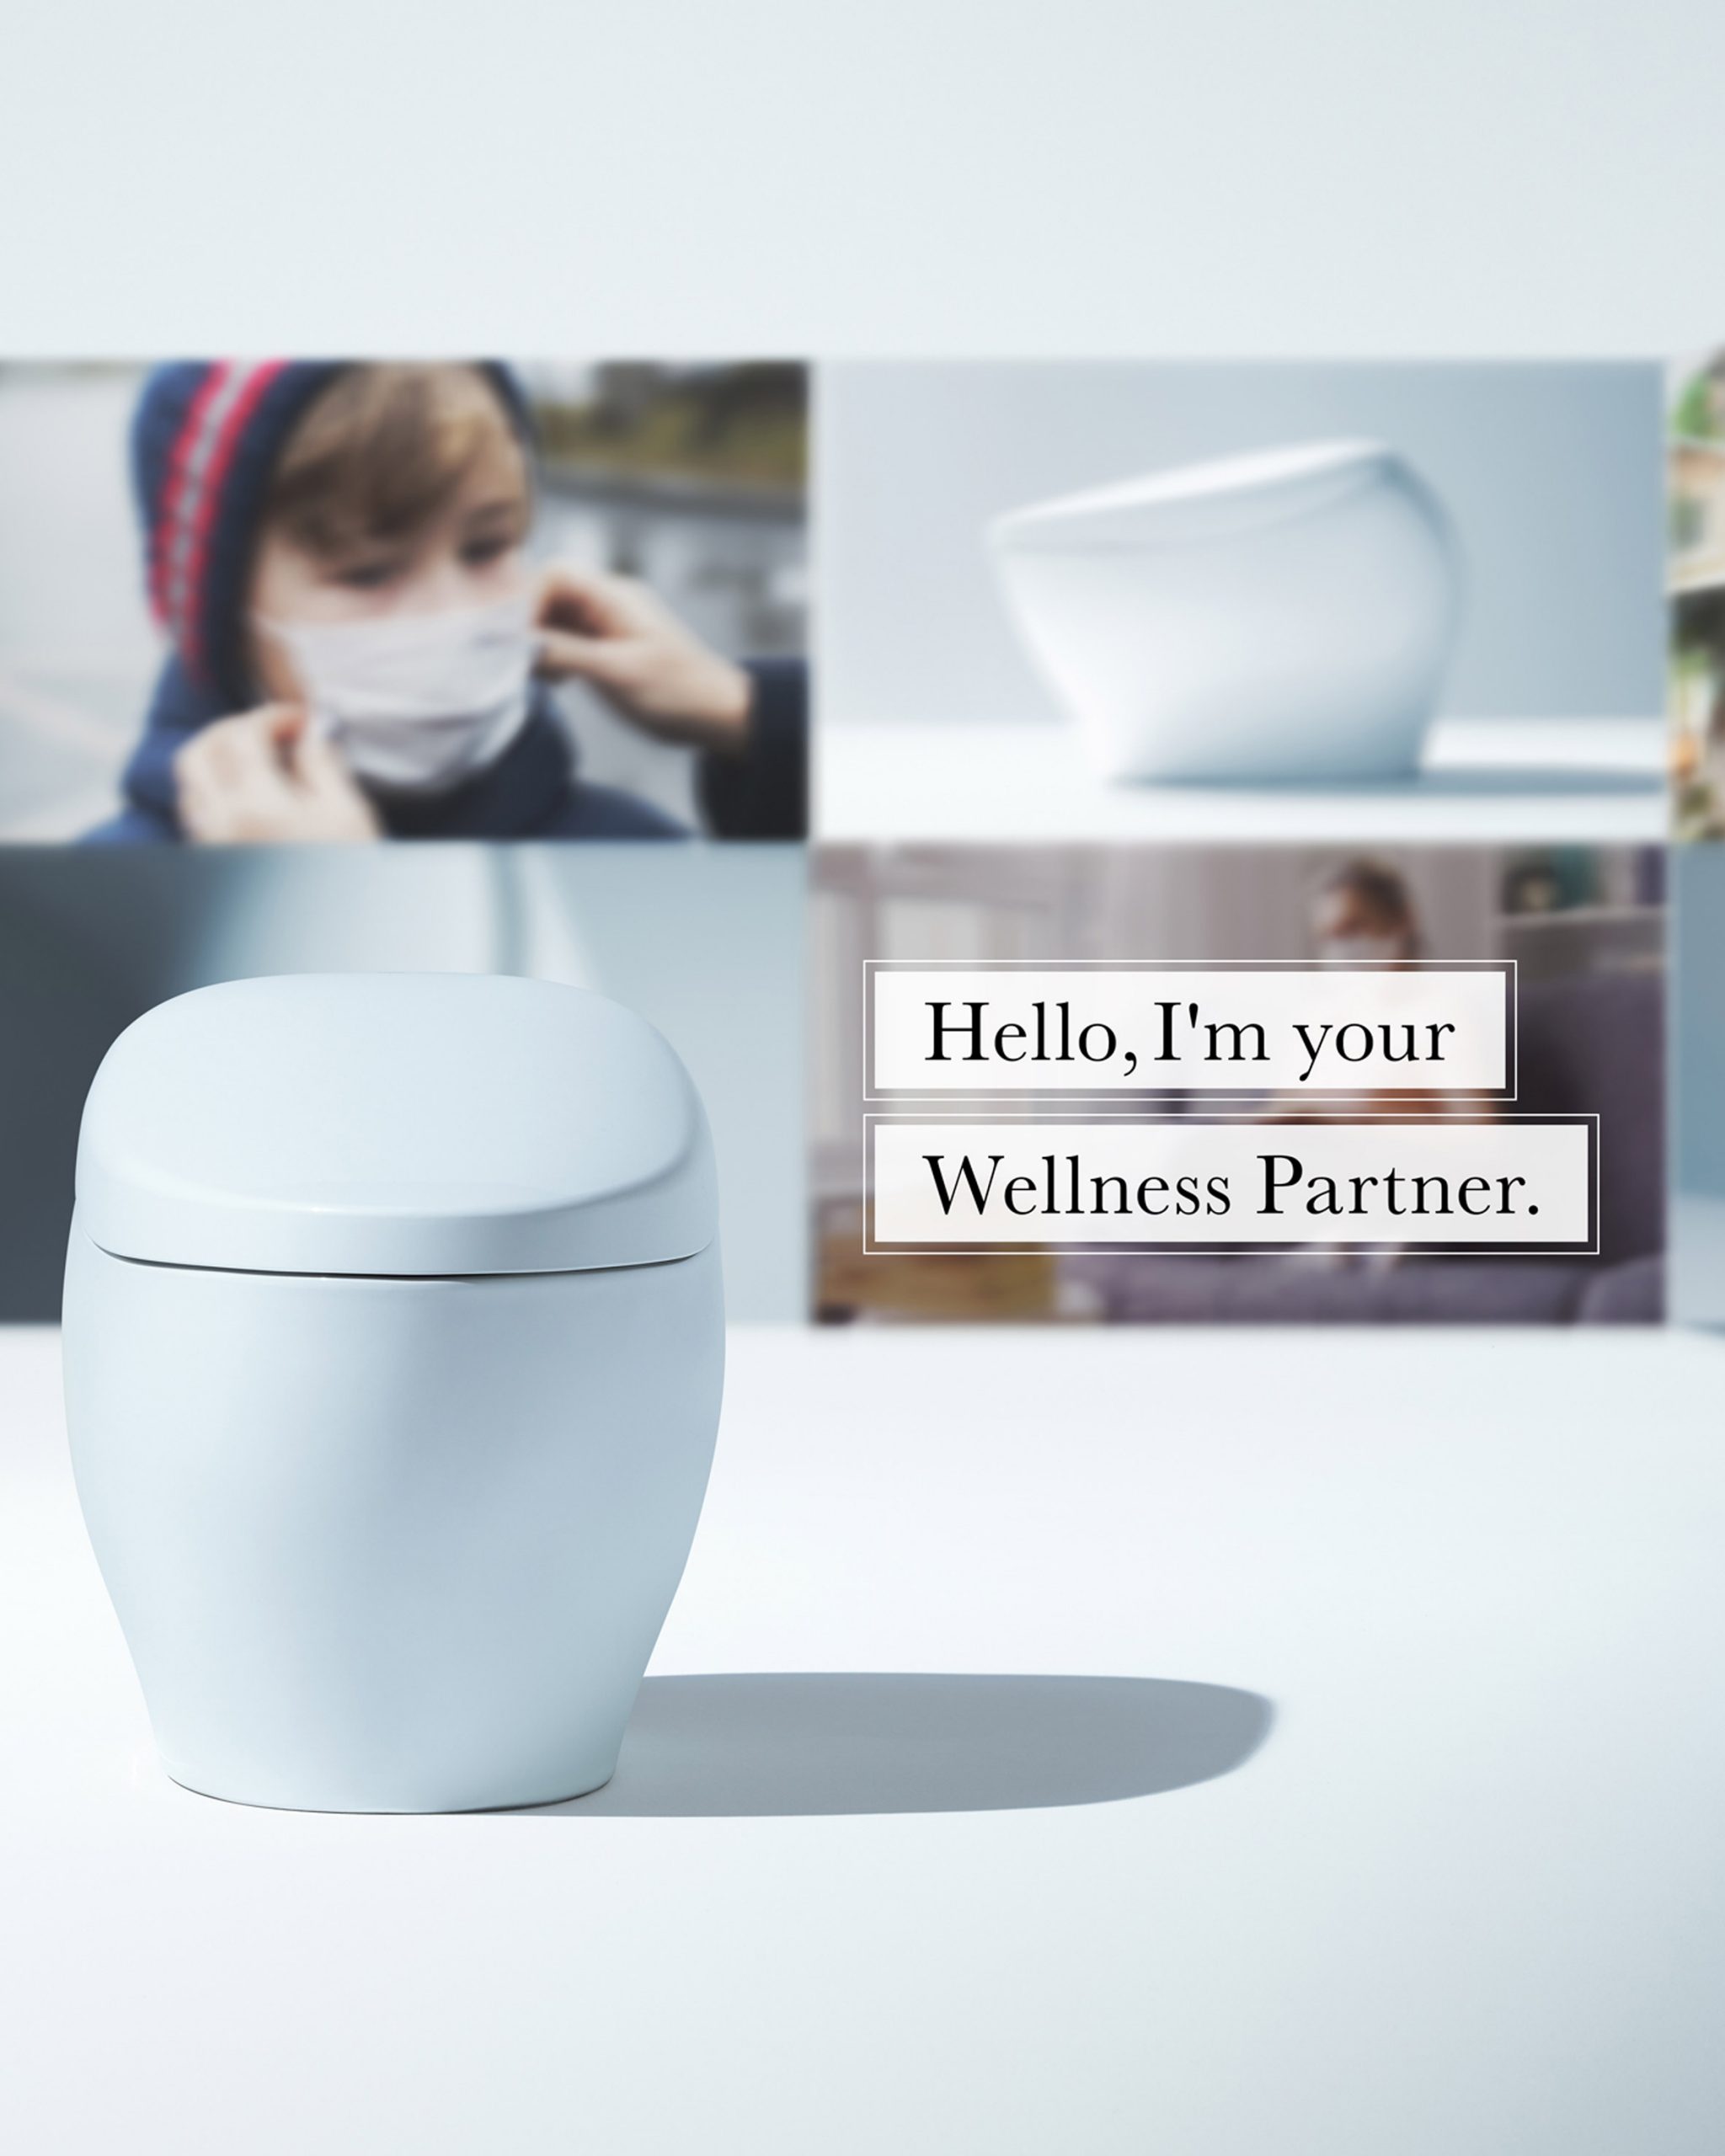 TOTO's Wellness Toilet which analyses its users' waste